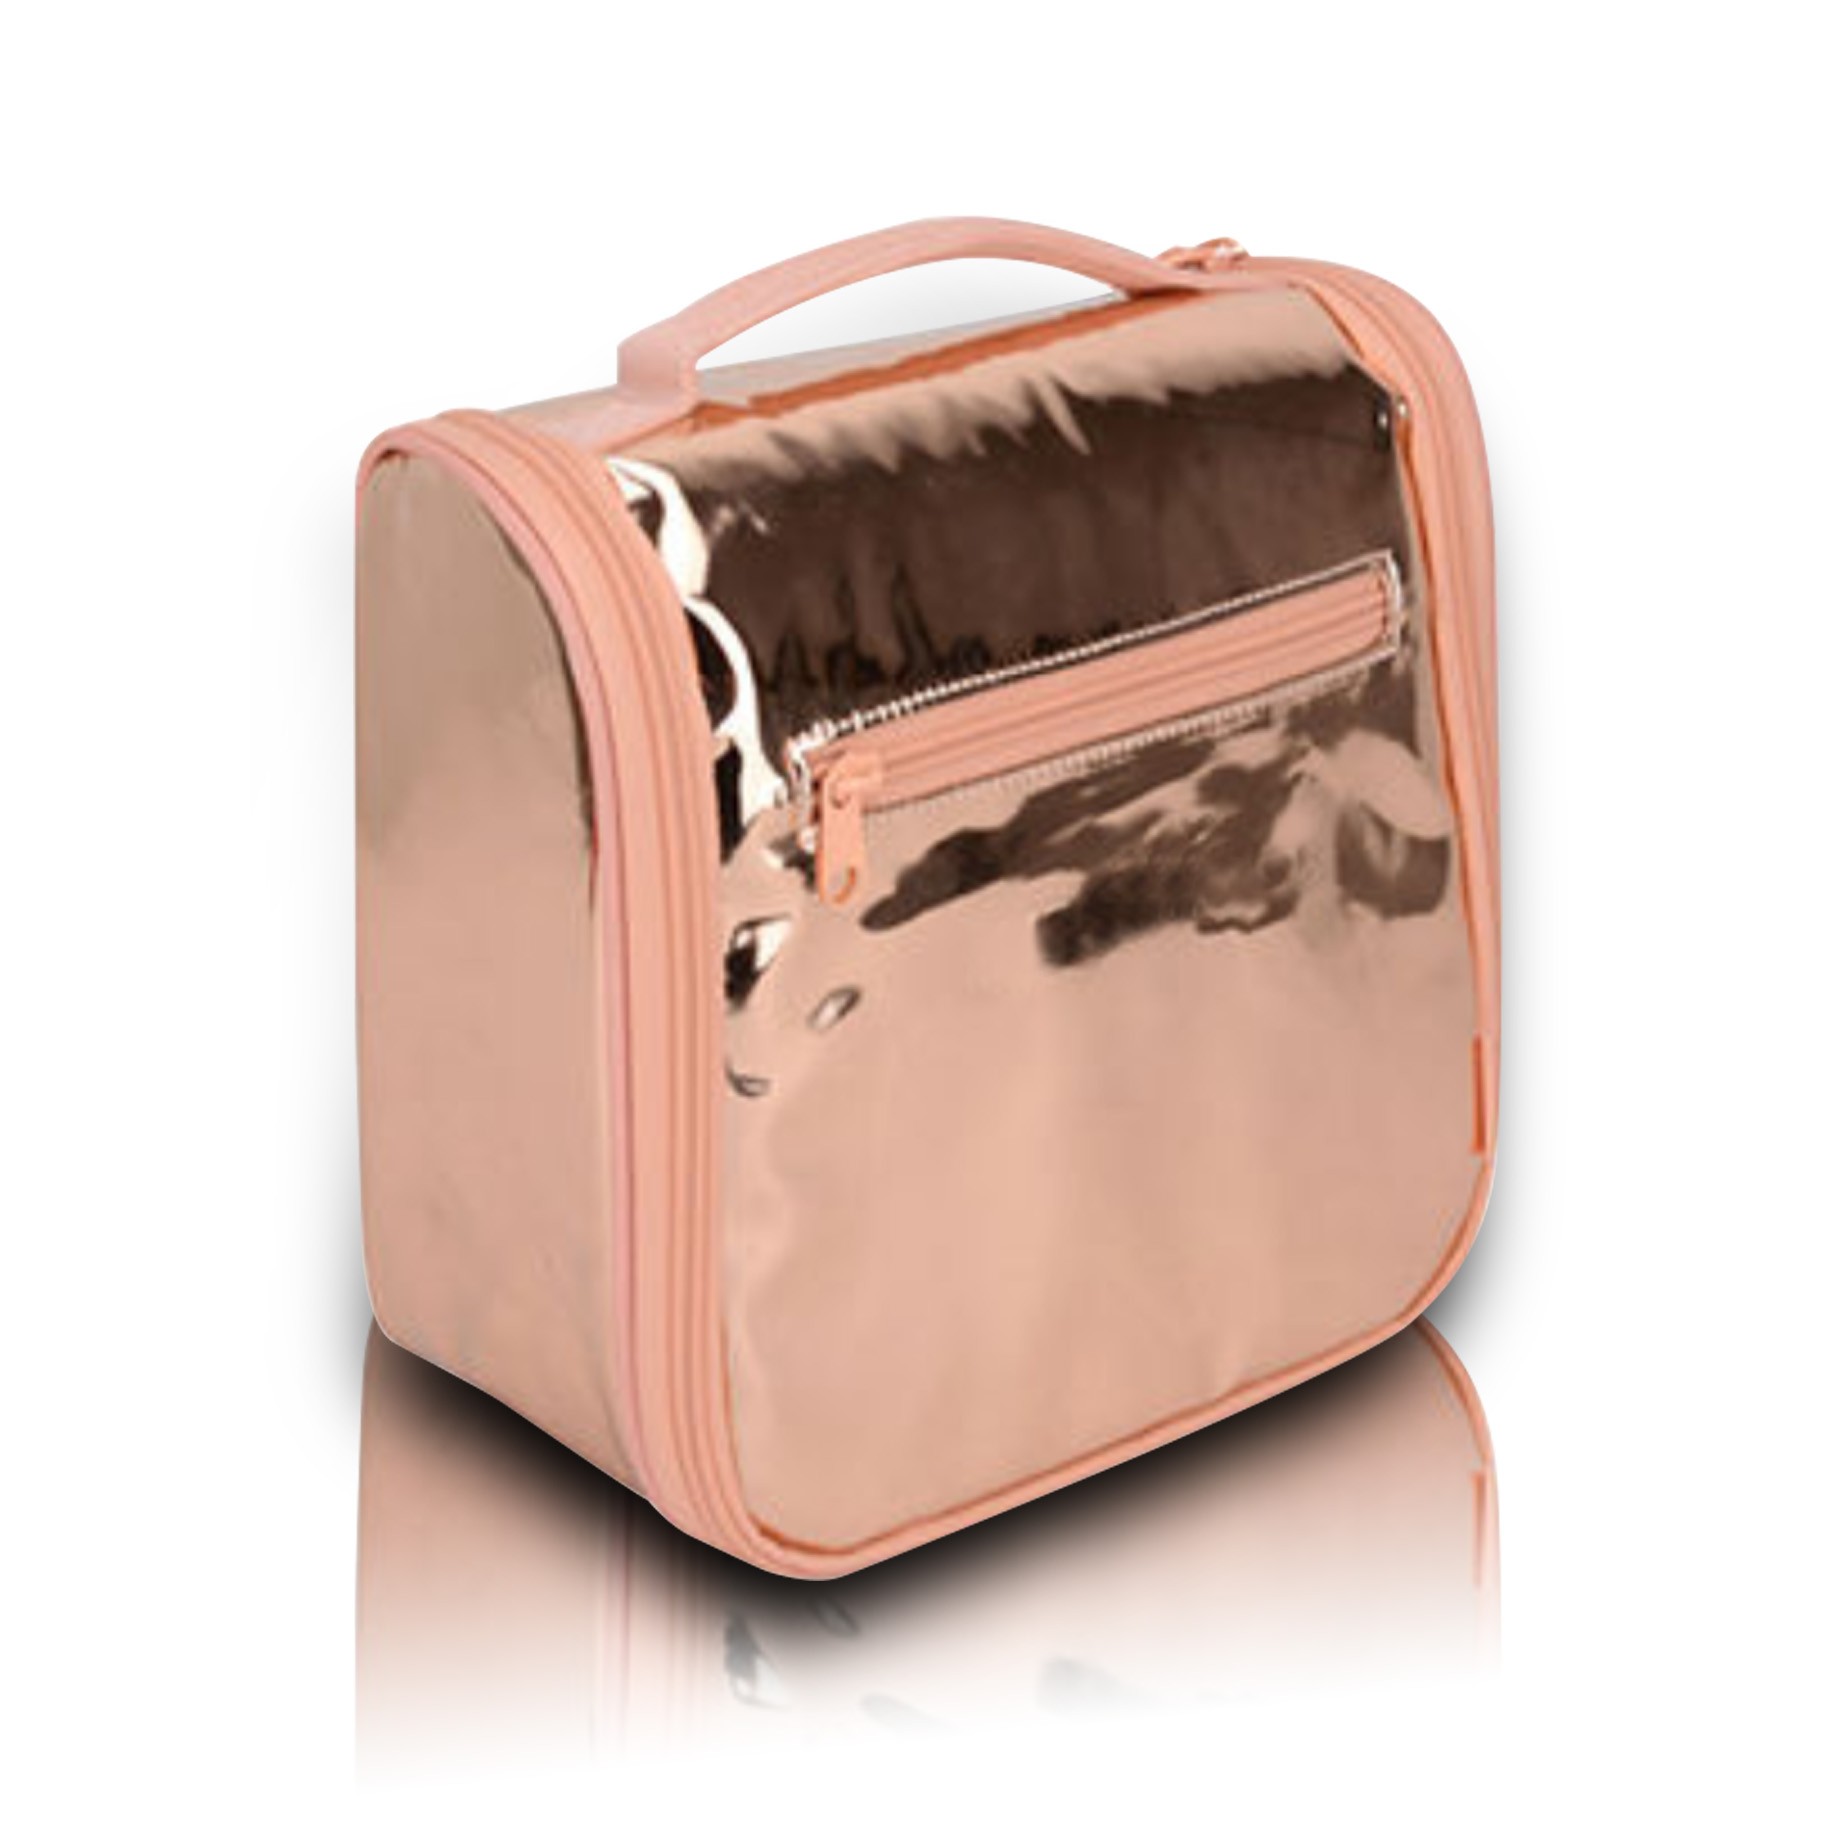 Metallic Cosmetic Pouch